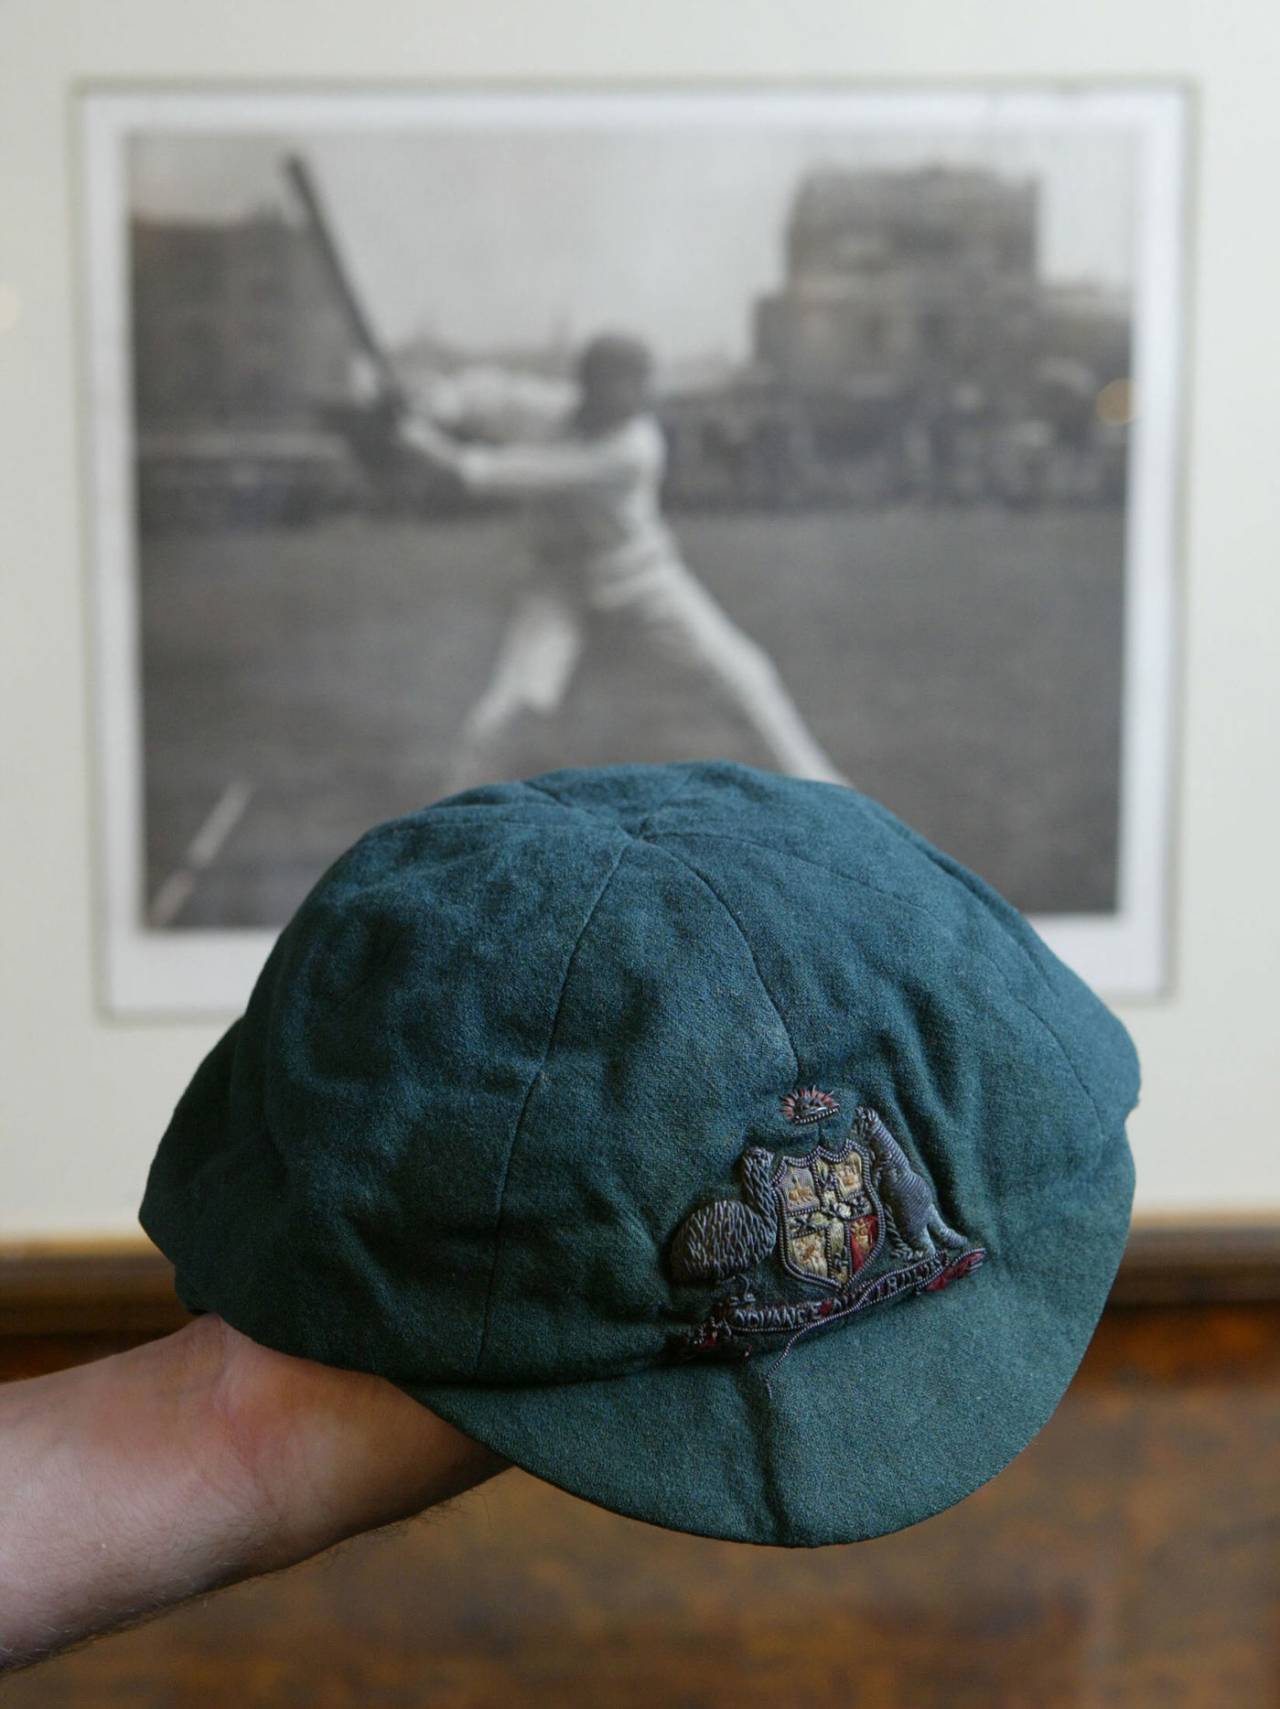 The cap that fascinates: Trumper's headgear at auction in 2004, with Beldam's image in the background&nbsp;&nbsp;&bull;&nbsp;&nbsp;Getty Images